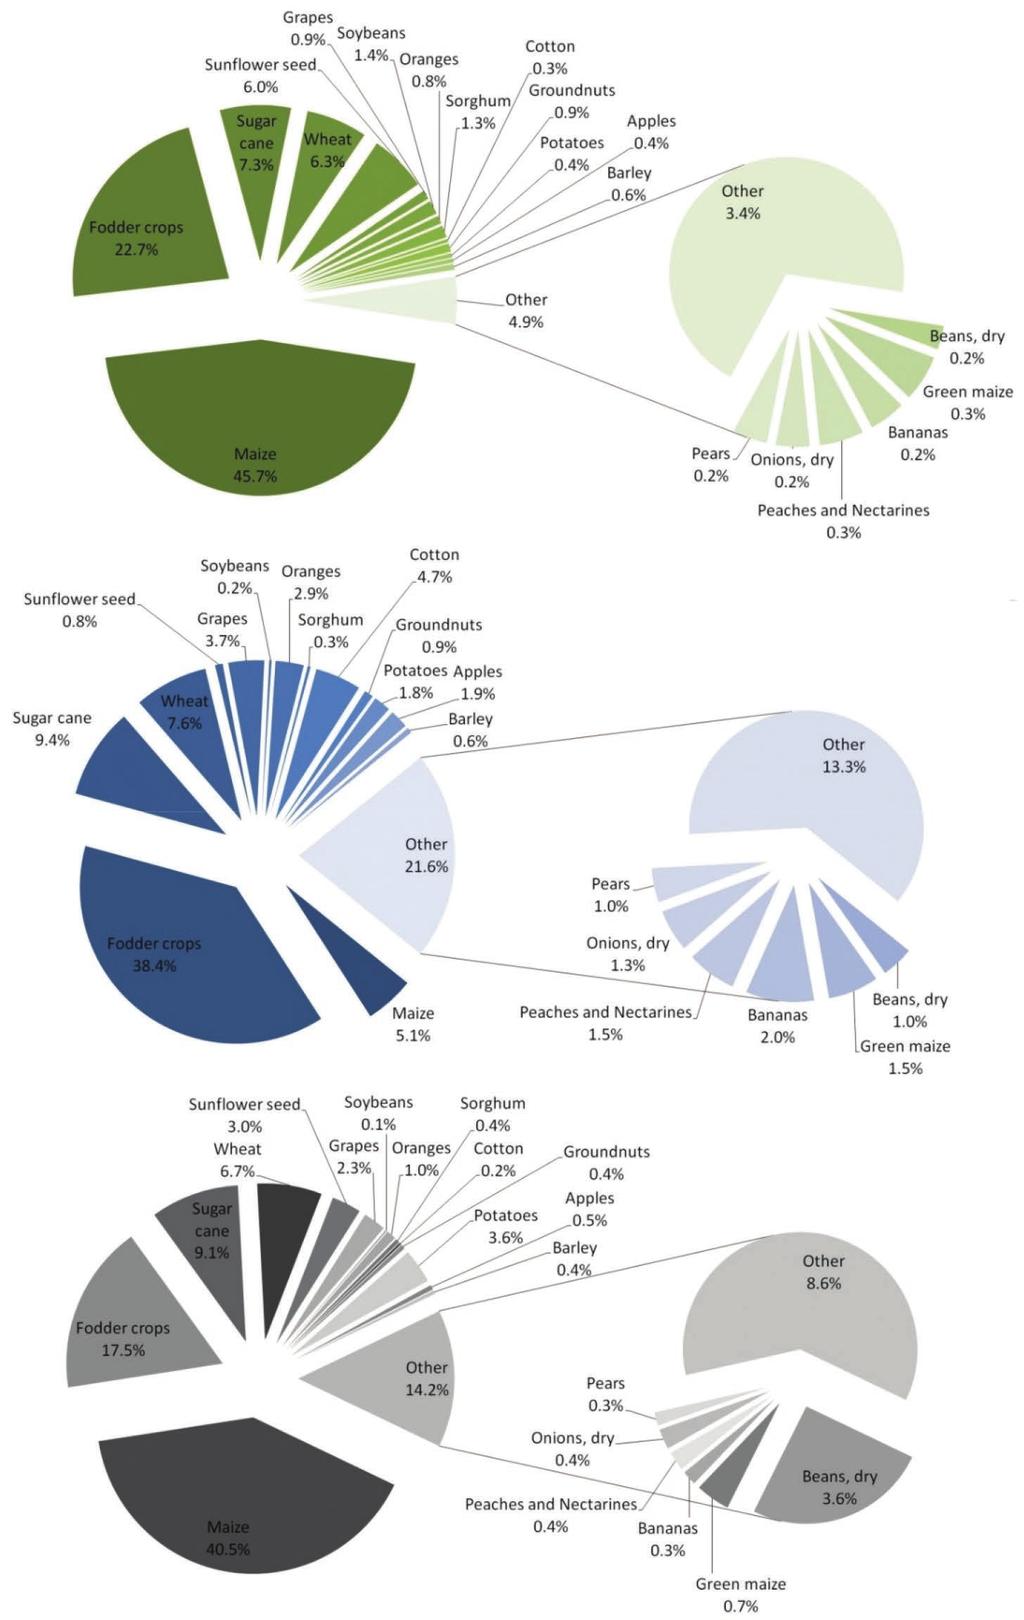 The green-water footprint of crop production is dominated by 5 crops.